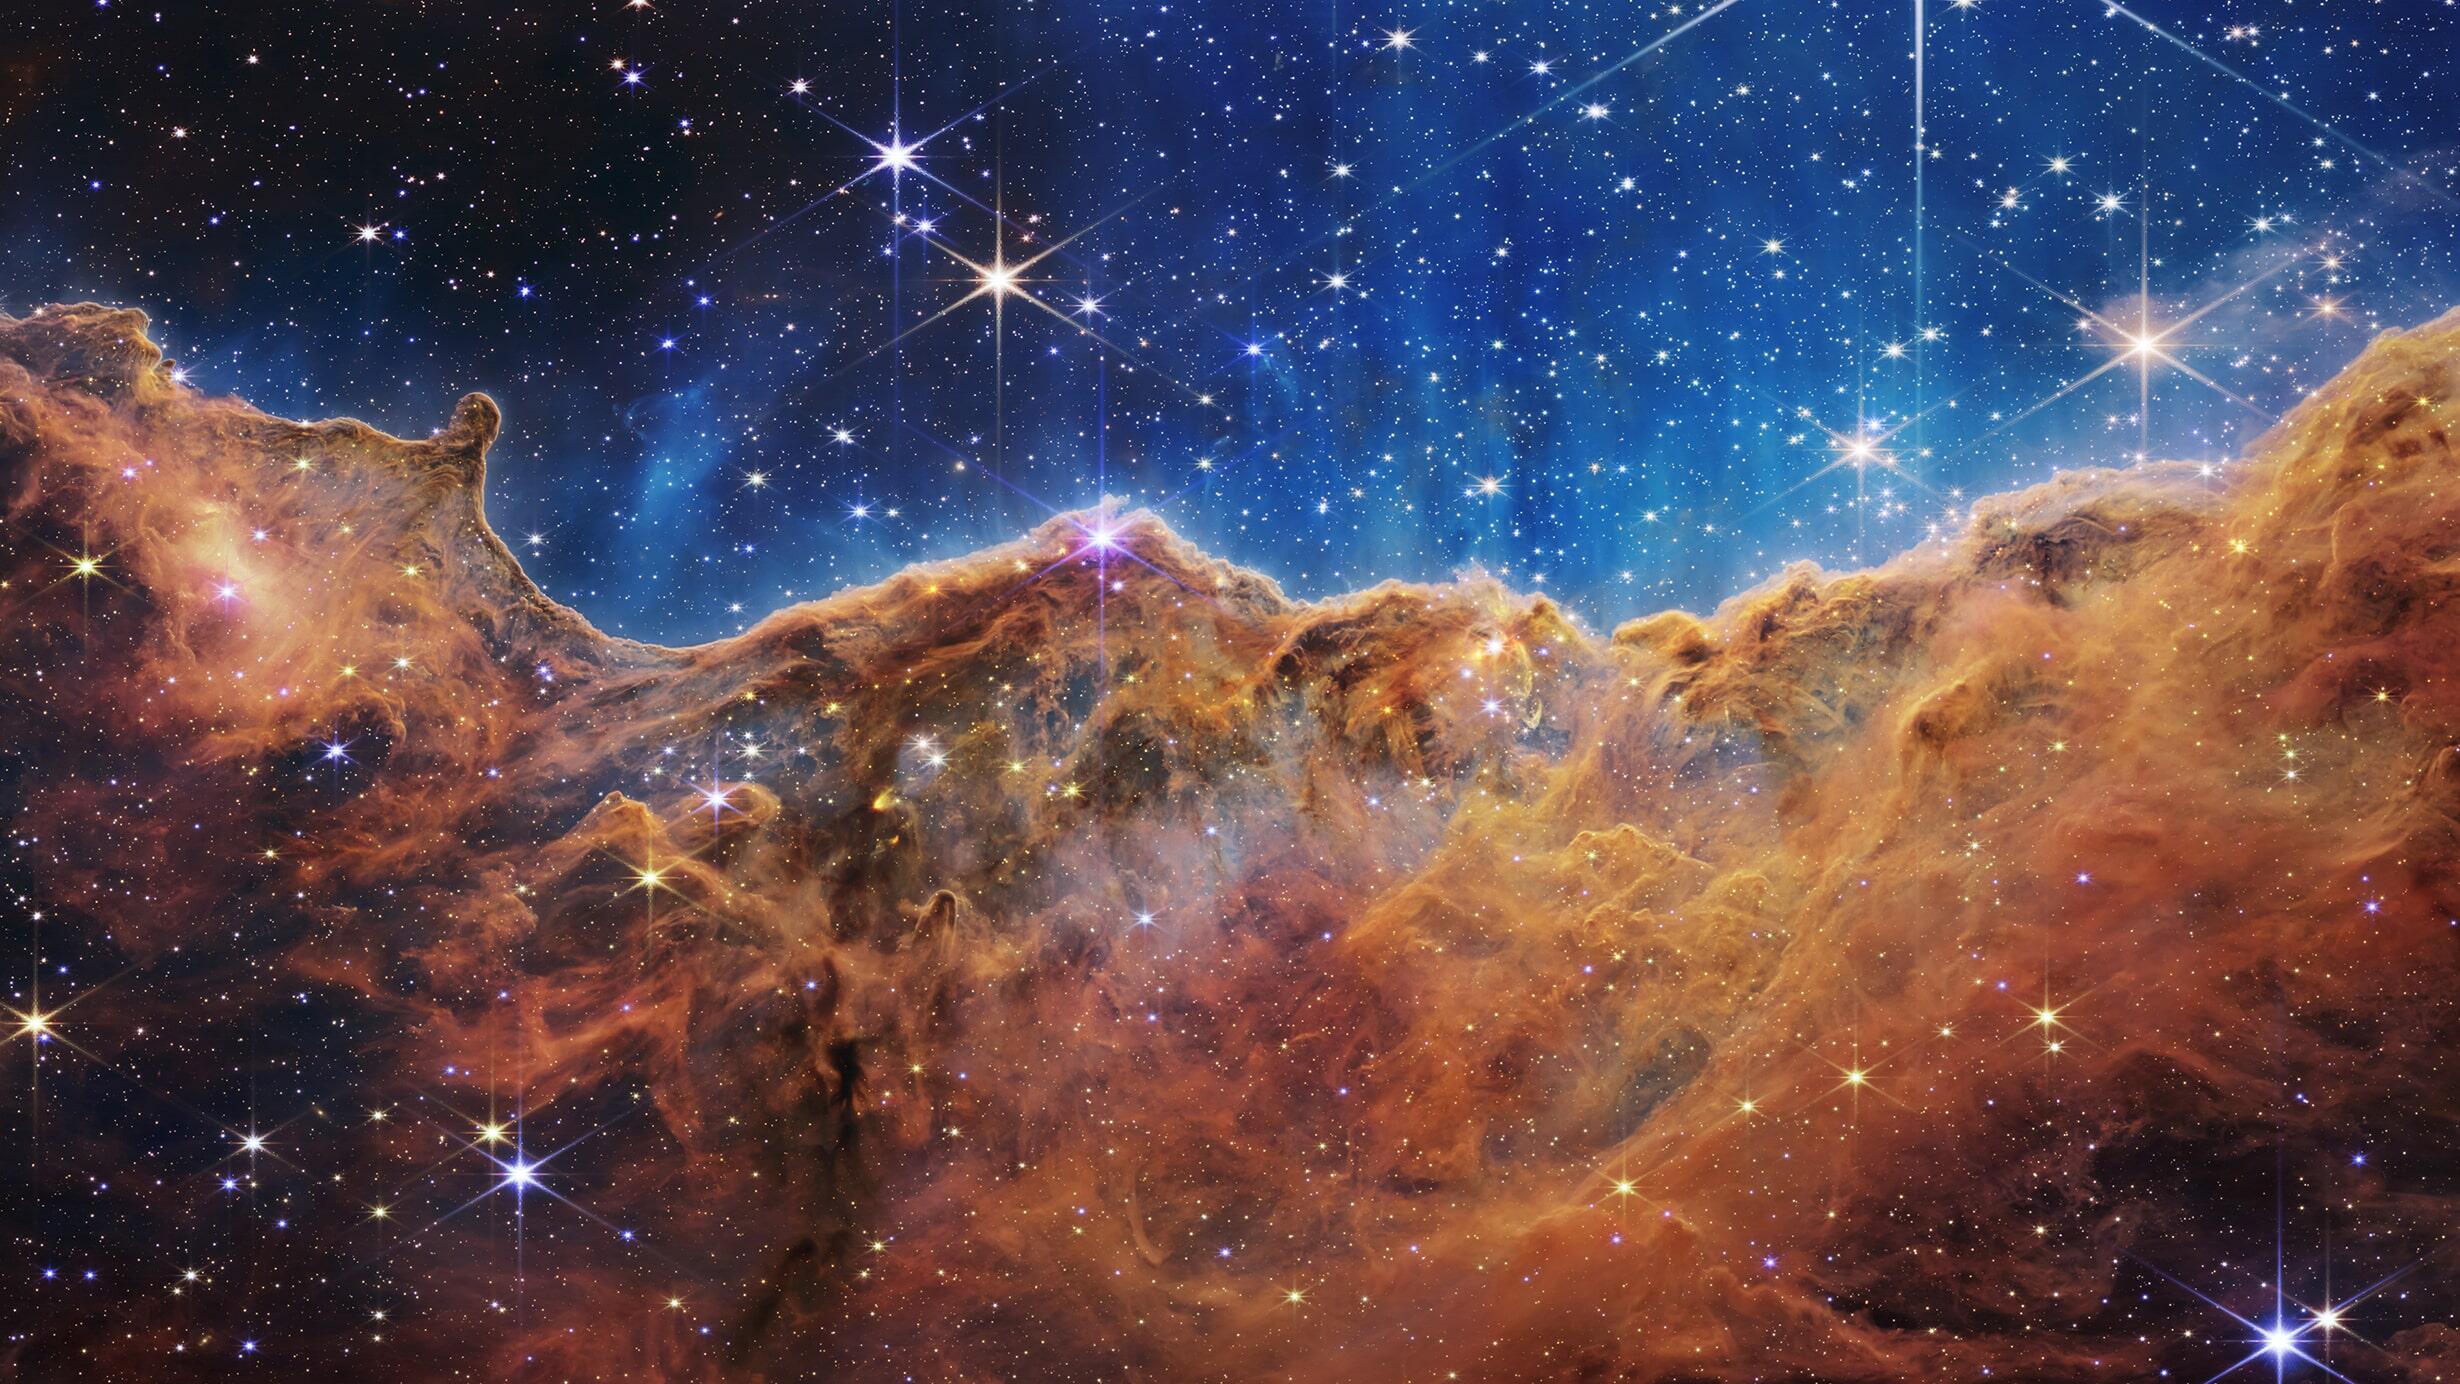 The Carina Nebula - a milky sea of dark brown against a vivid blue expanse, stars shining through - photographed by the James Webb telescope in 2022.